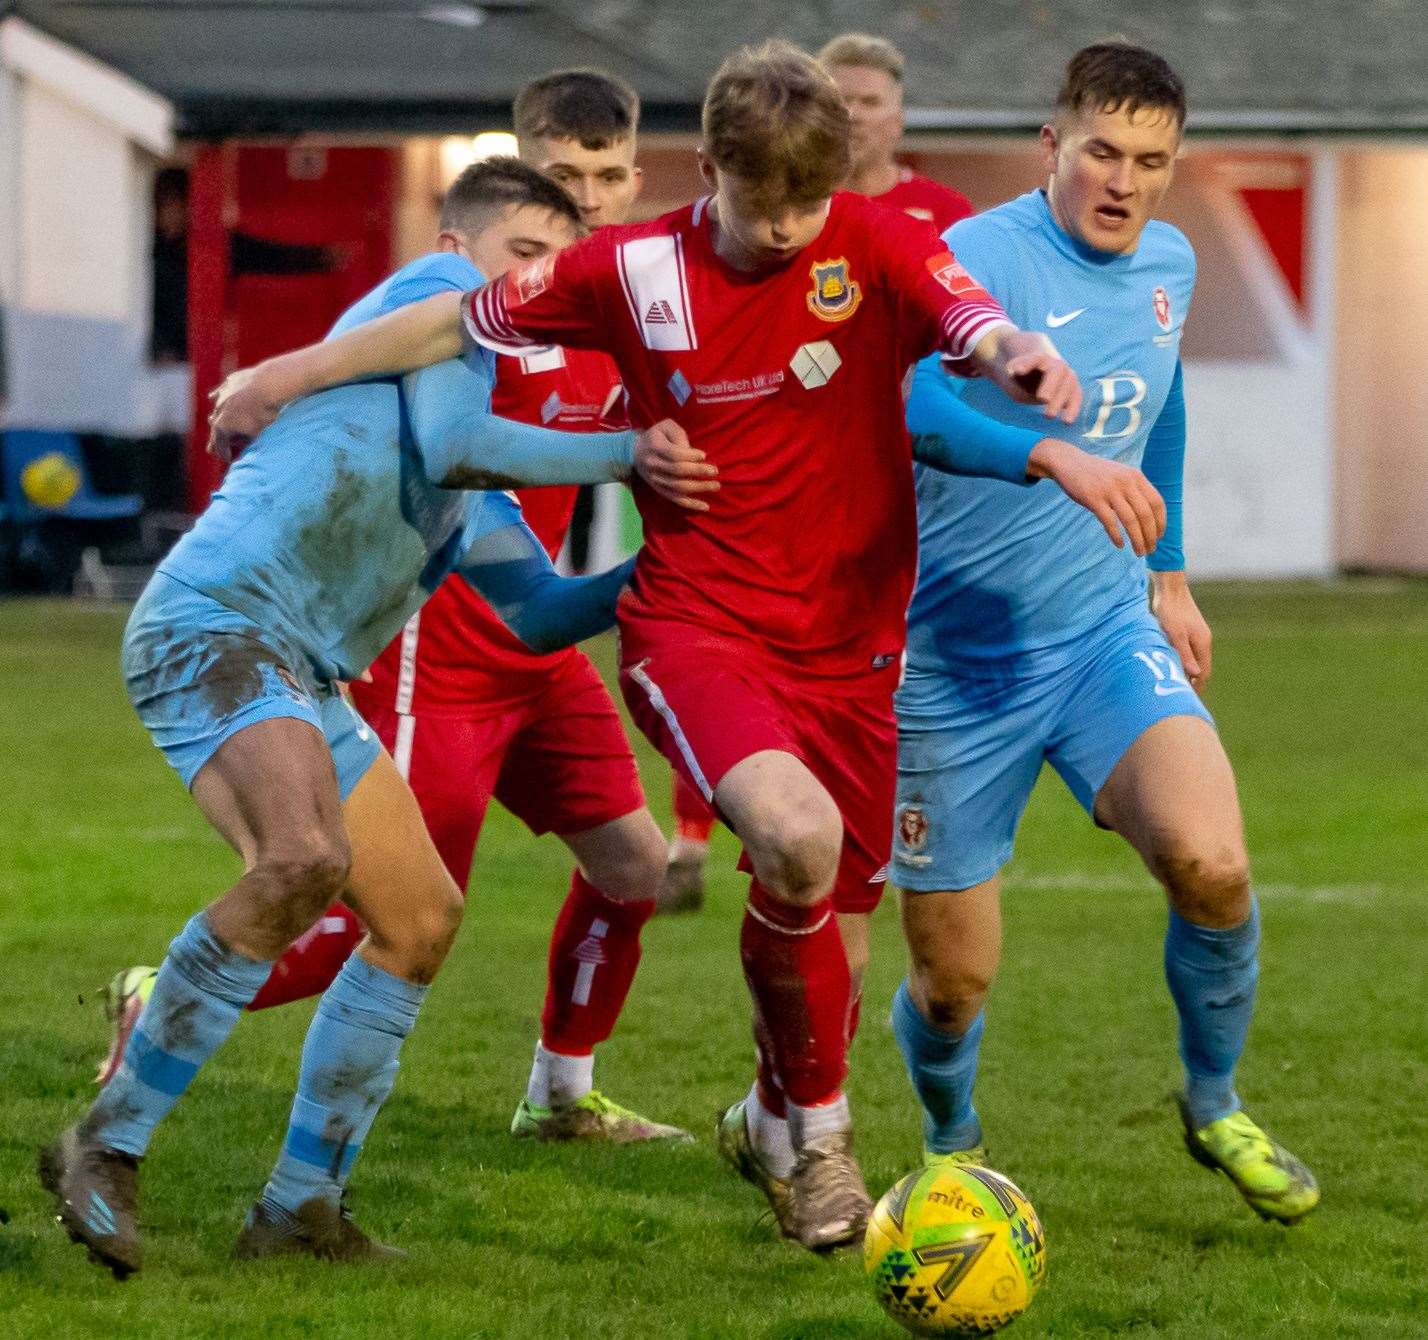 George Mcilroy bursts through two Hastings challenges during Whitstable's 1-0 defeat at the Belmont at the weekend. Picture: Les Biggs